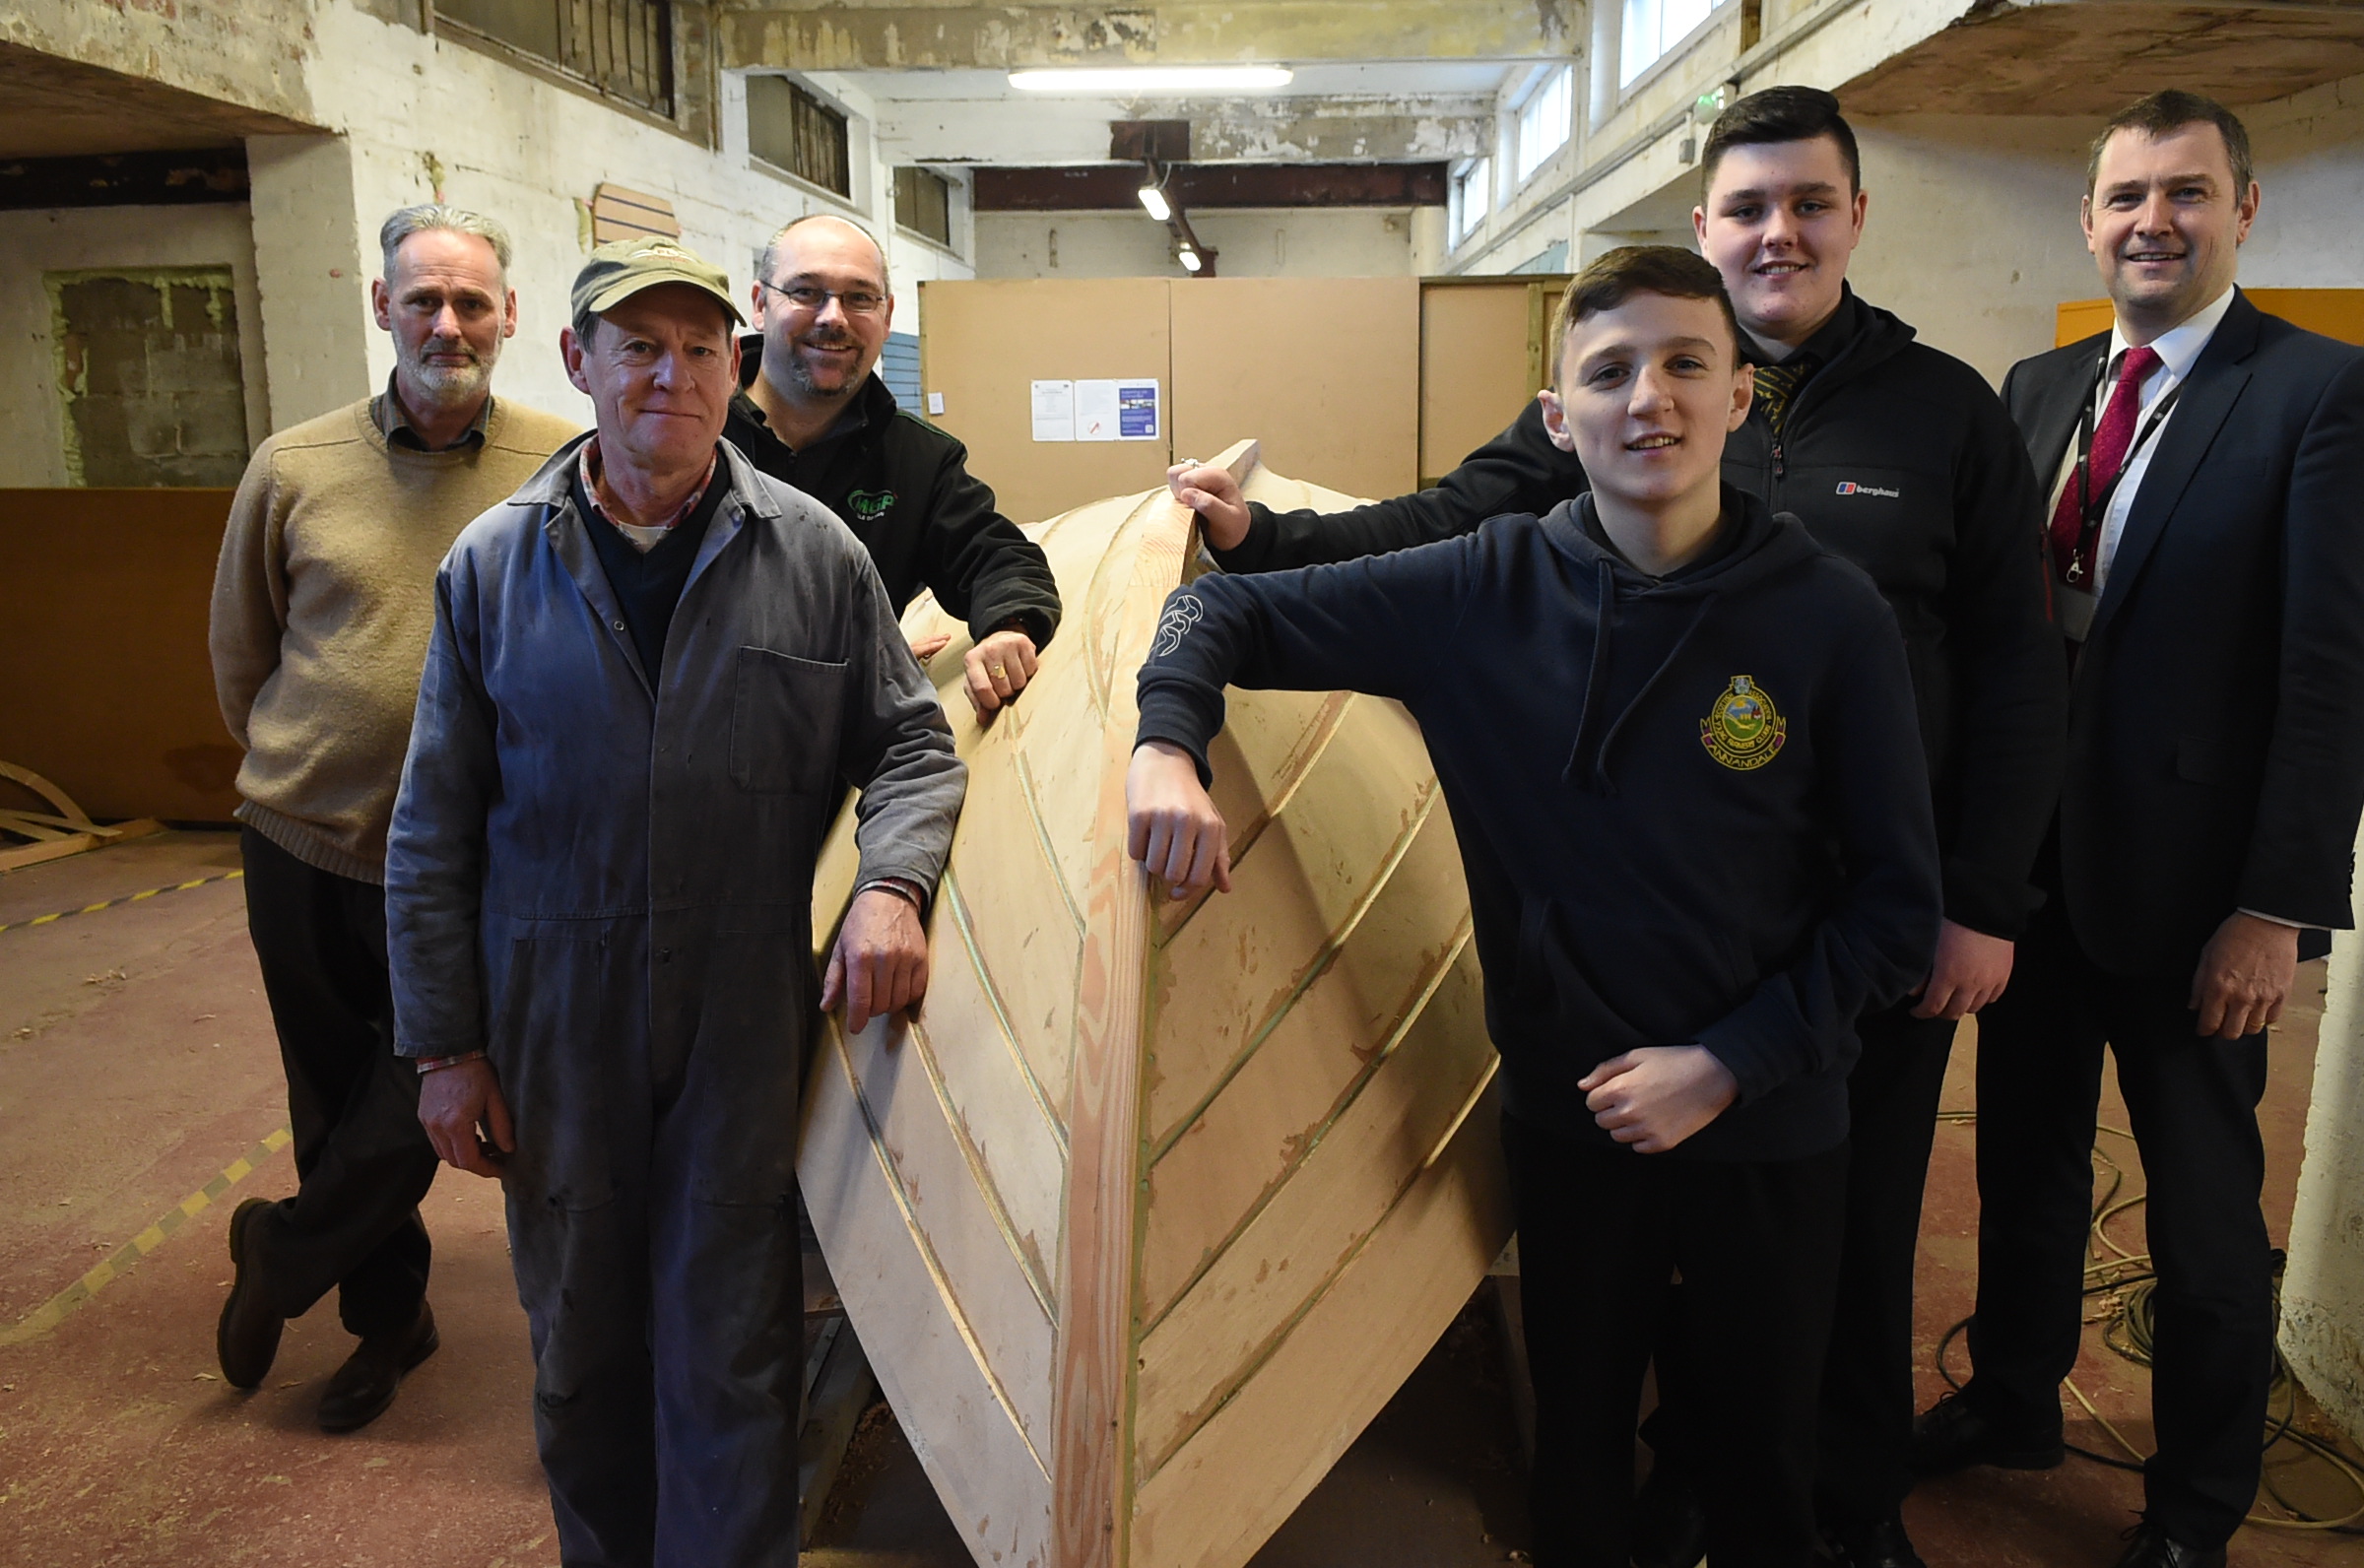 Pupils get hands on with boat building